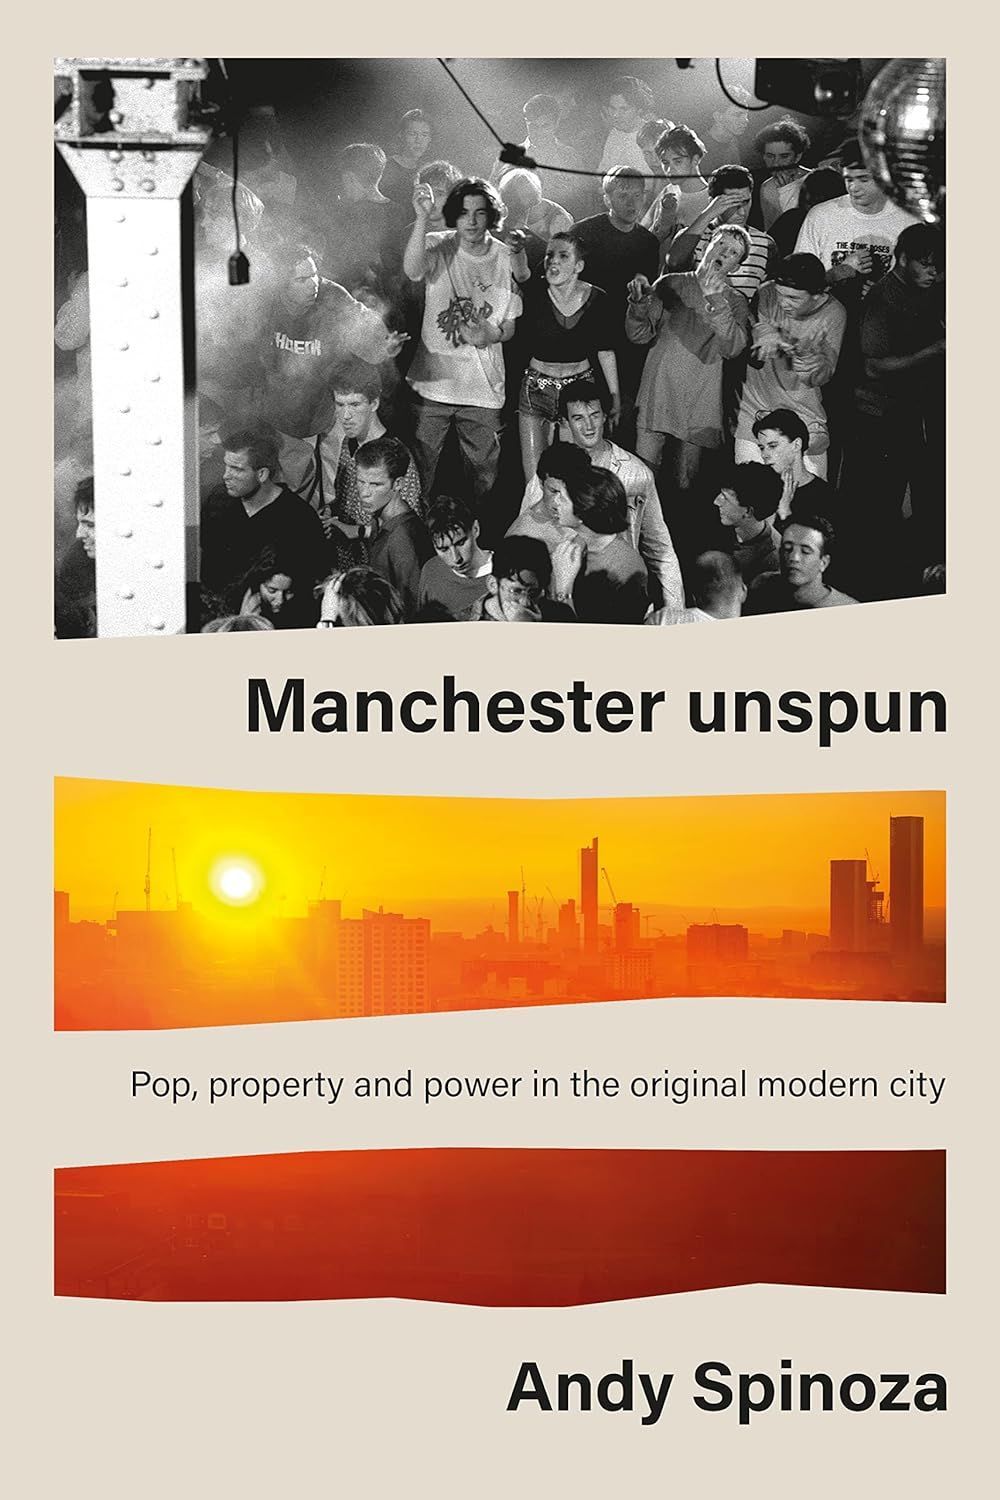 After the Party: A Walking Tour of Manchester with Andy Spinoza